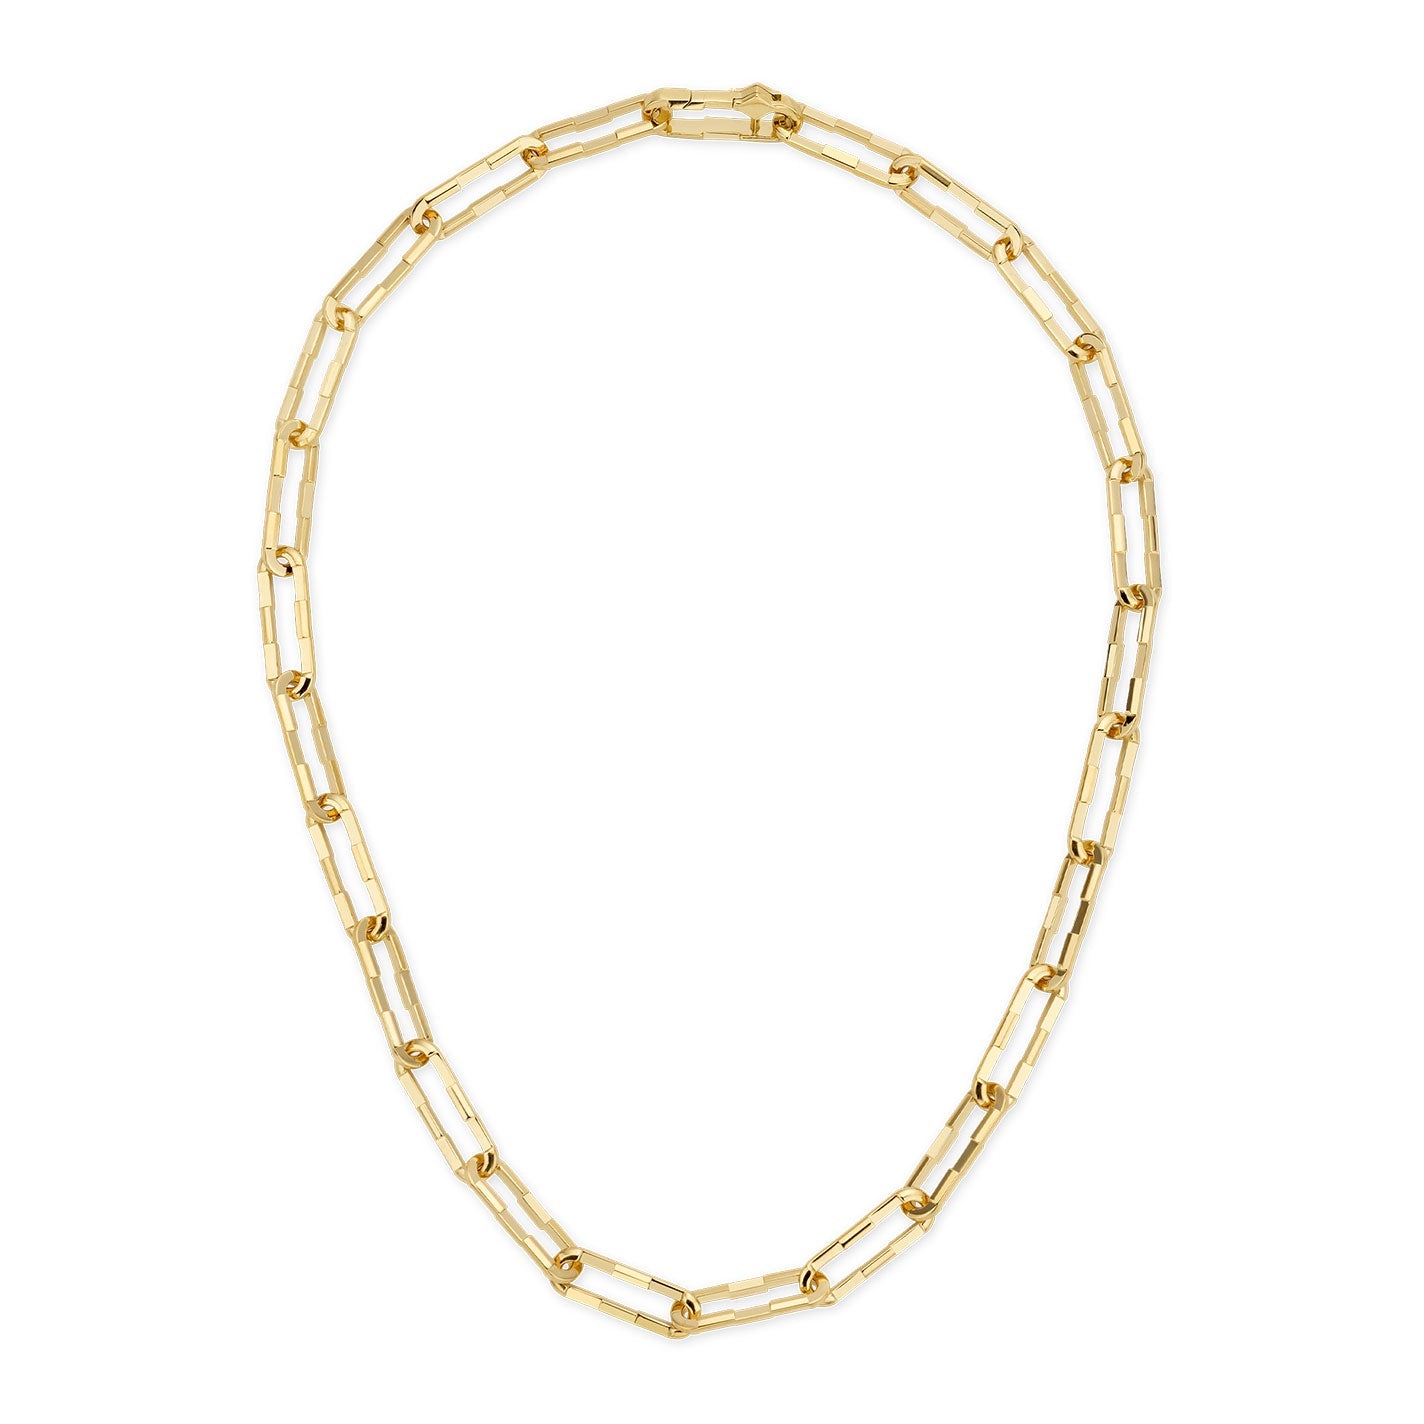 Gucci Link to Love 18K Yellow Gold Wide Chain Necklace